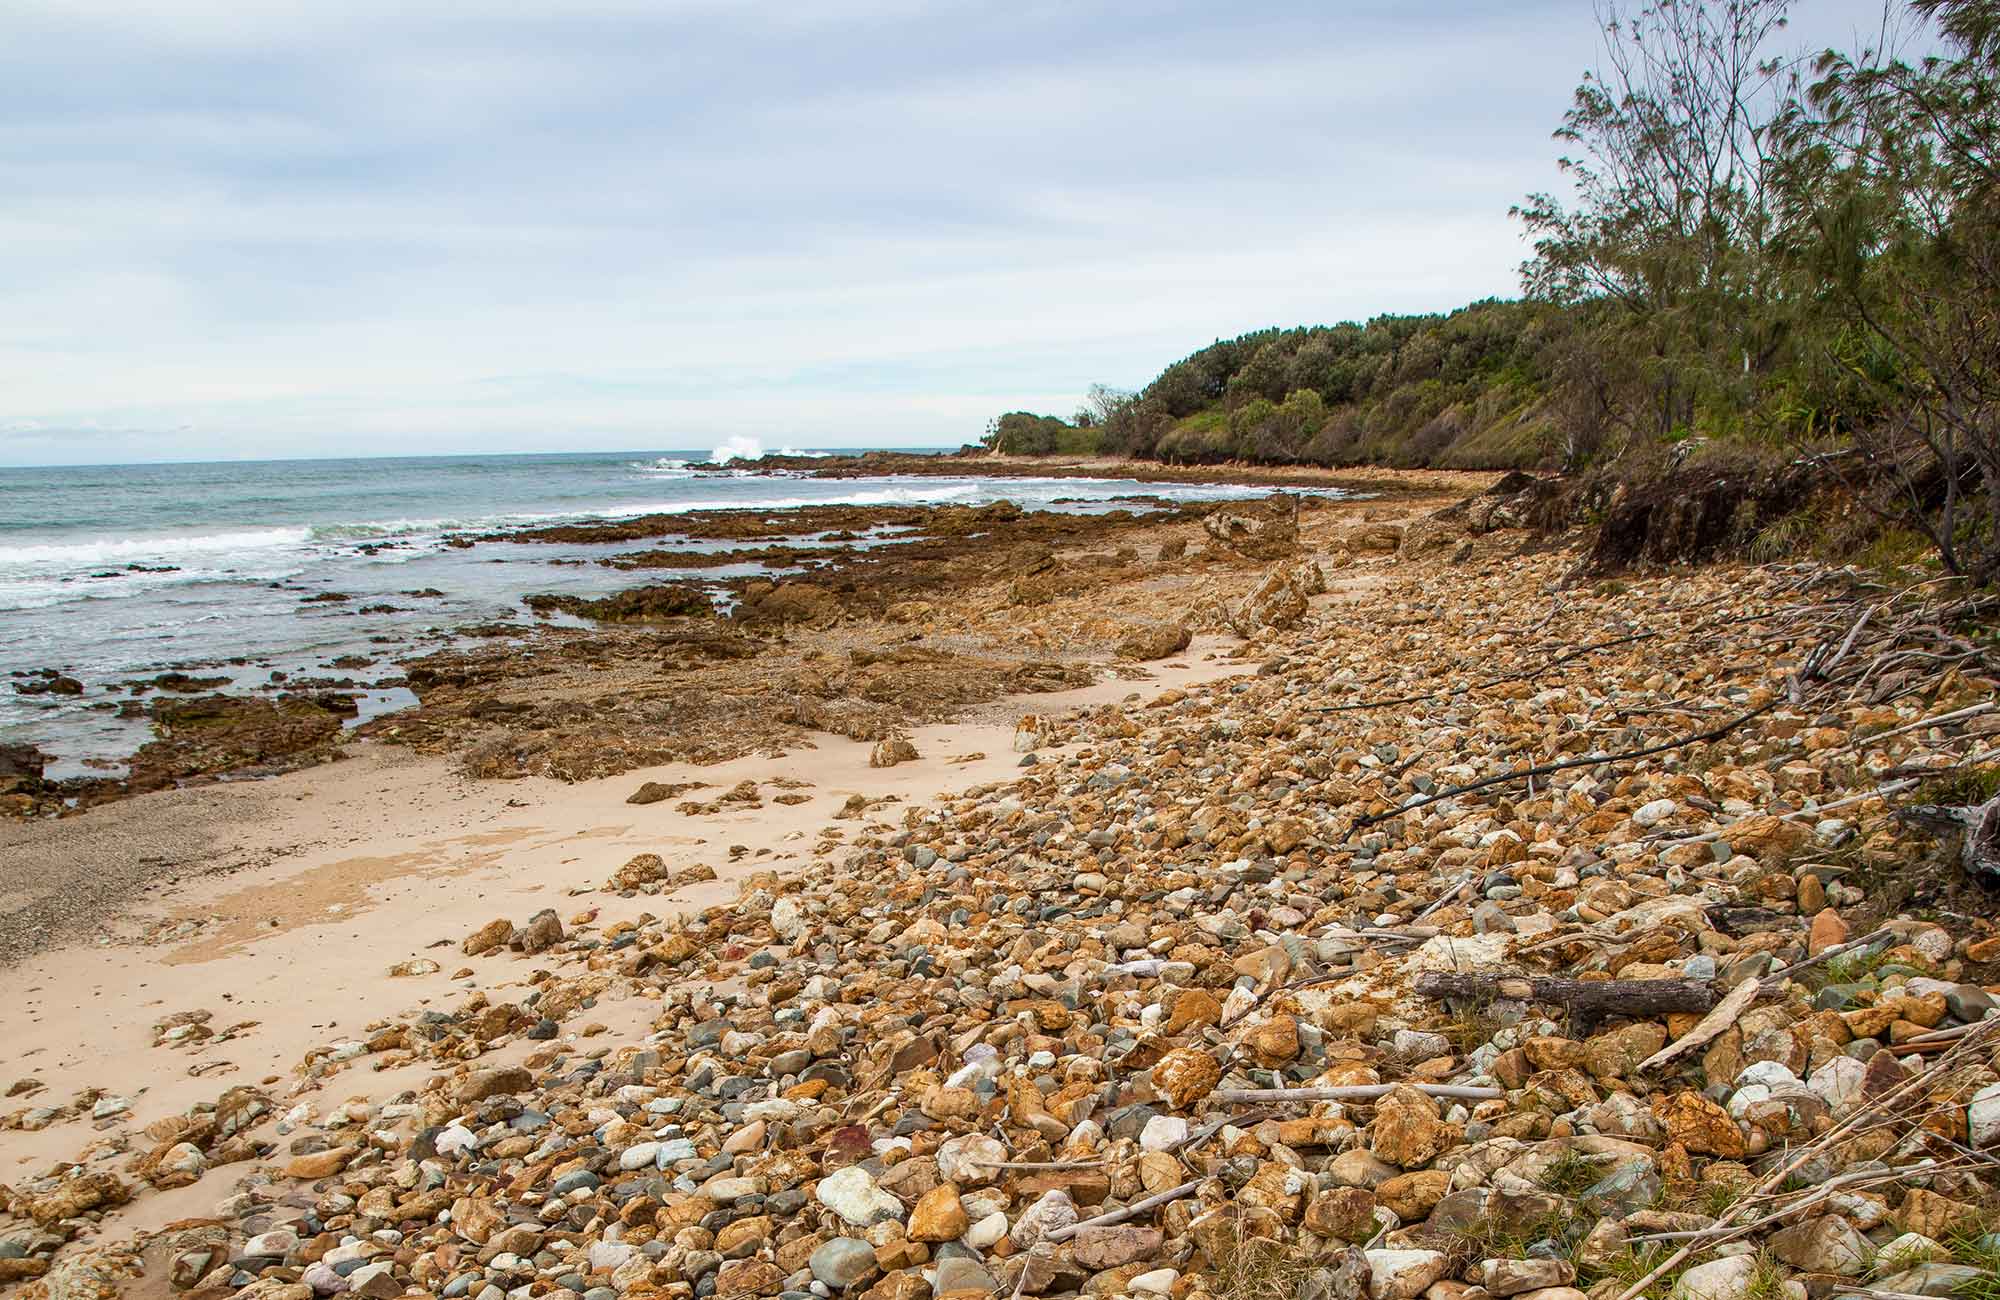 Rocky Point campground, Yuraygir National Park. Photo: Rob Cleary/DPIE